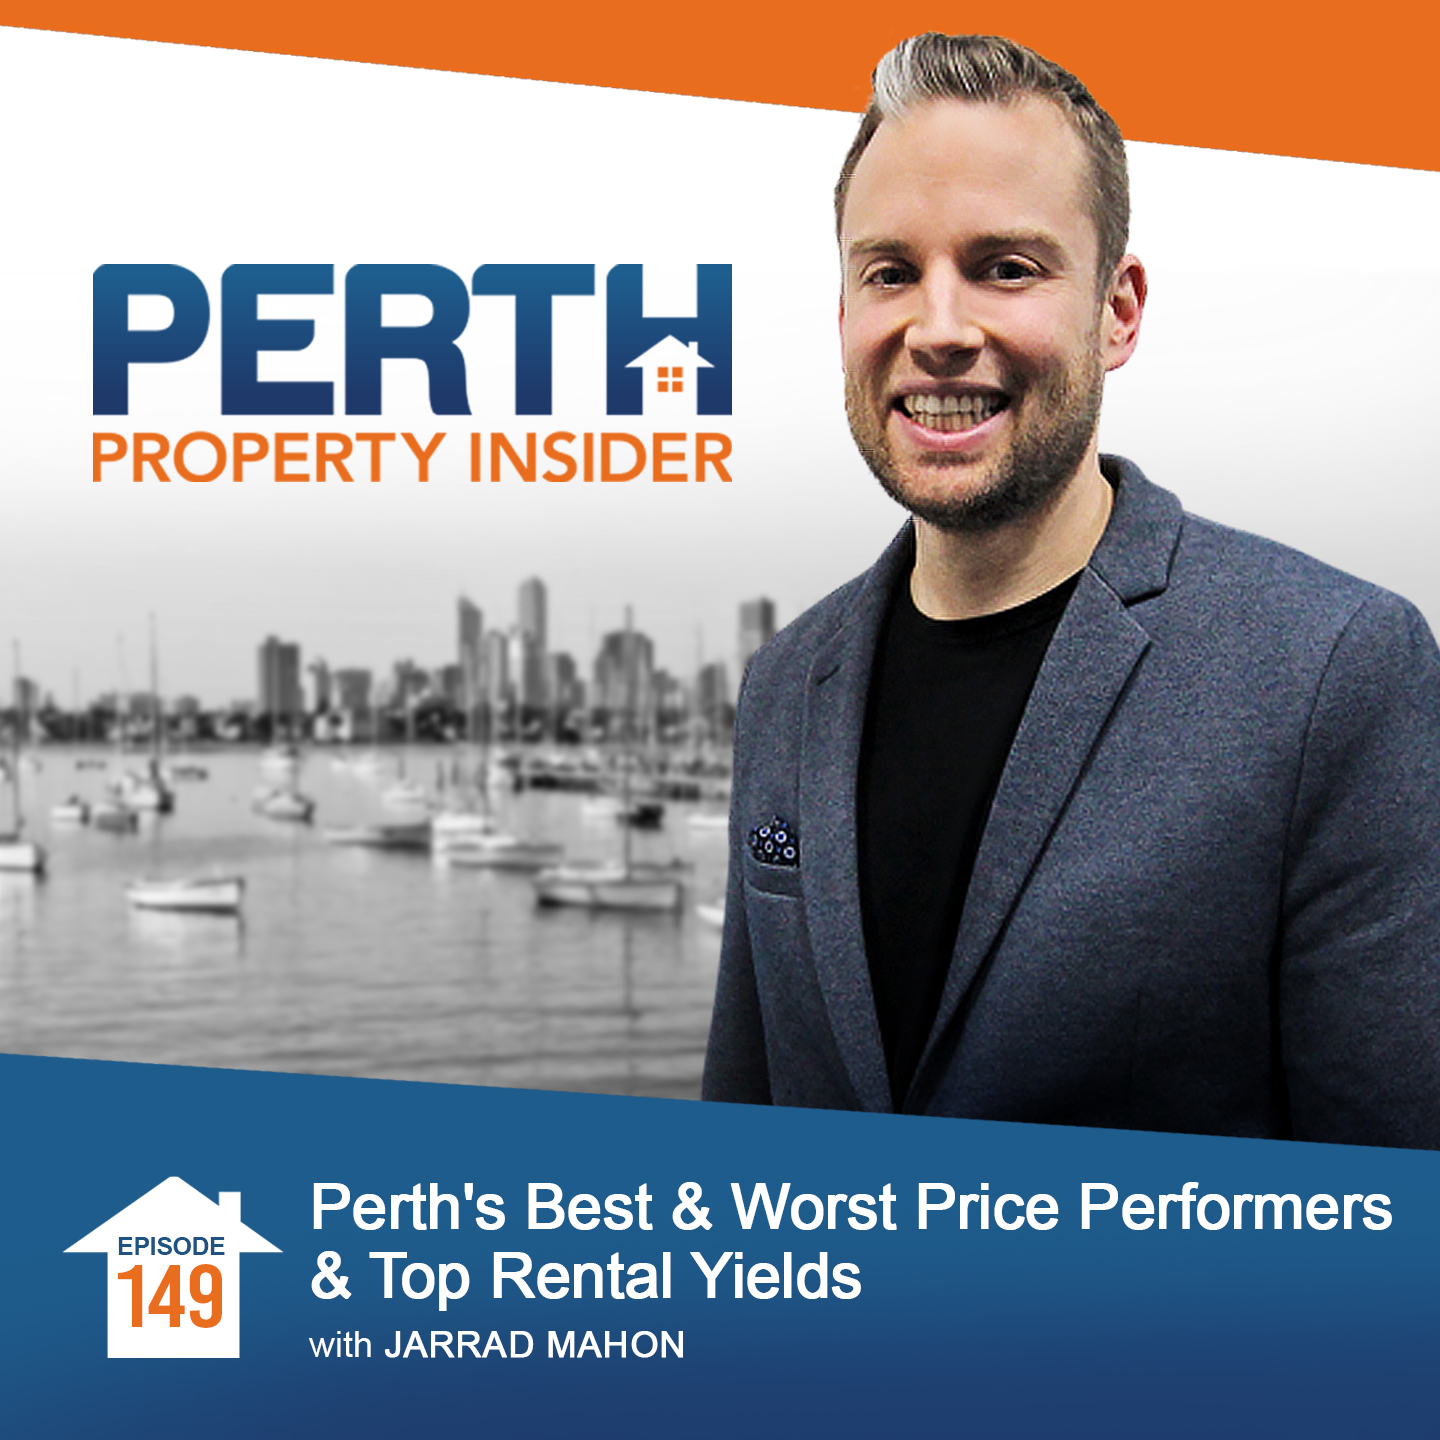 Perth's Best & Worst Price Performers & Top Rental Yields